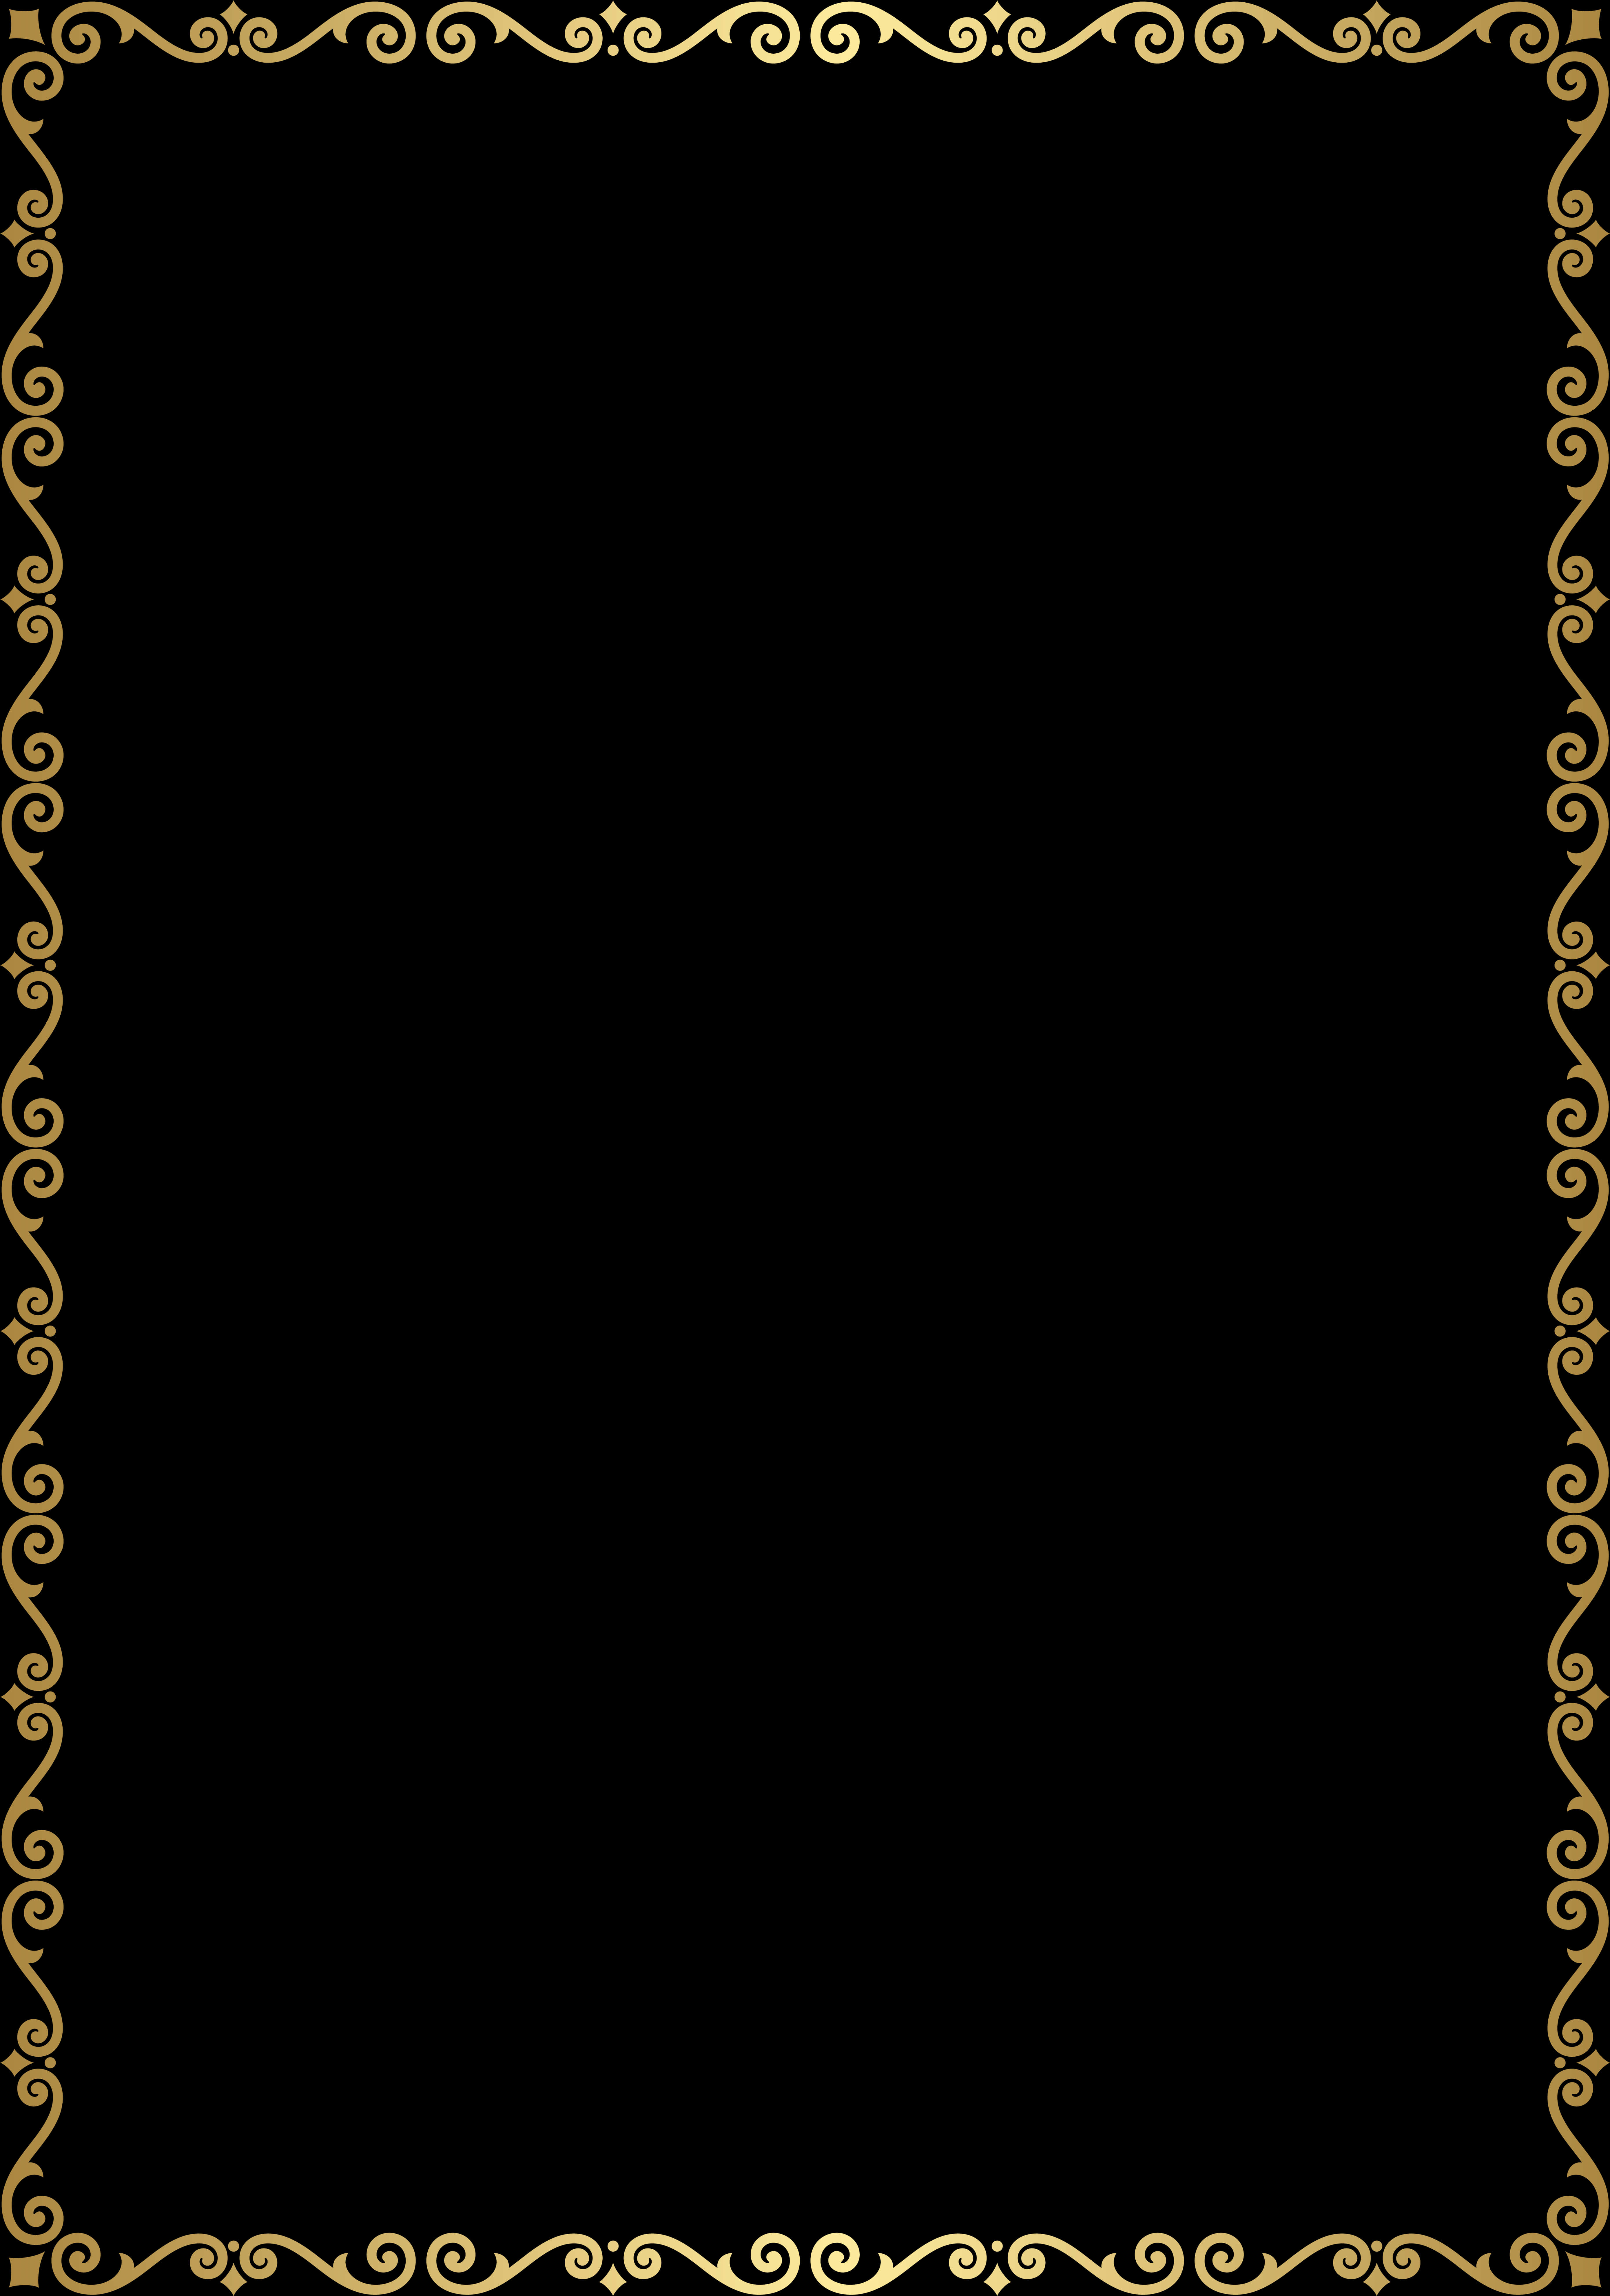 A Black Background With Gold Swirls